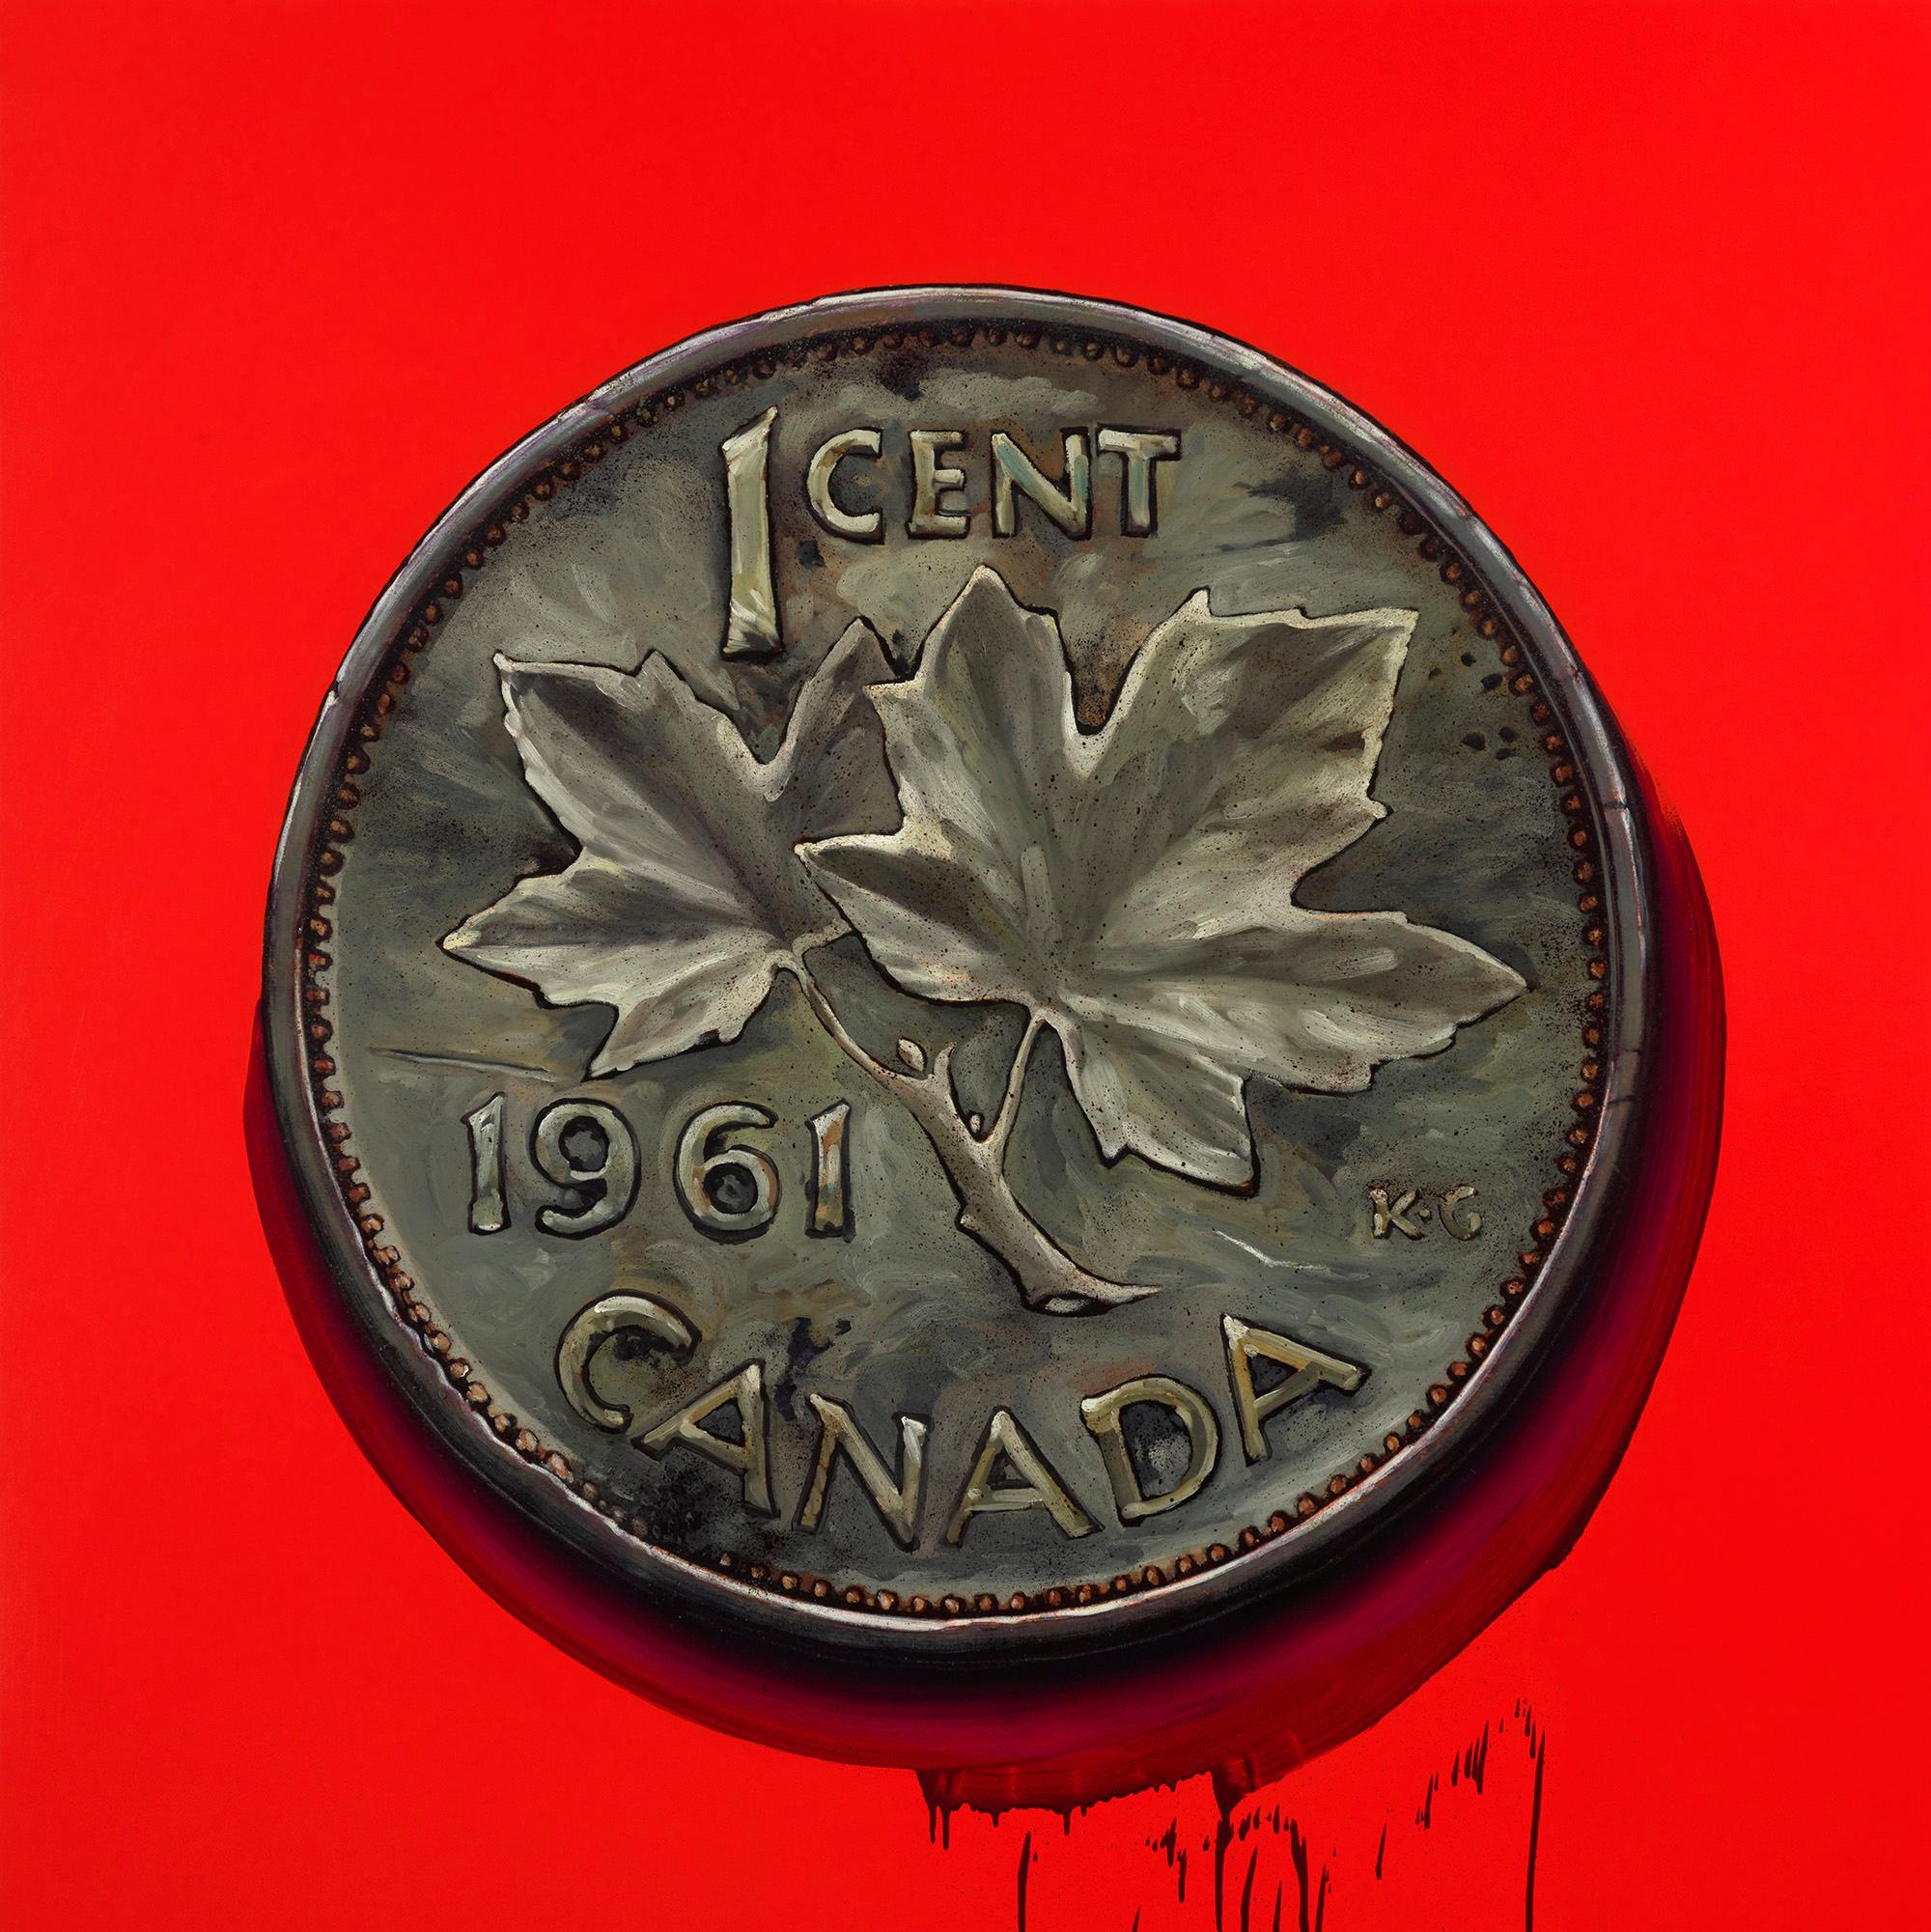 James Lahey Still-Life Painting - 1 Cent Portrait, 1961 (Made in Canada 3 – A Memoir)